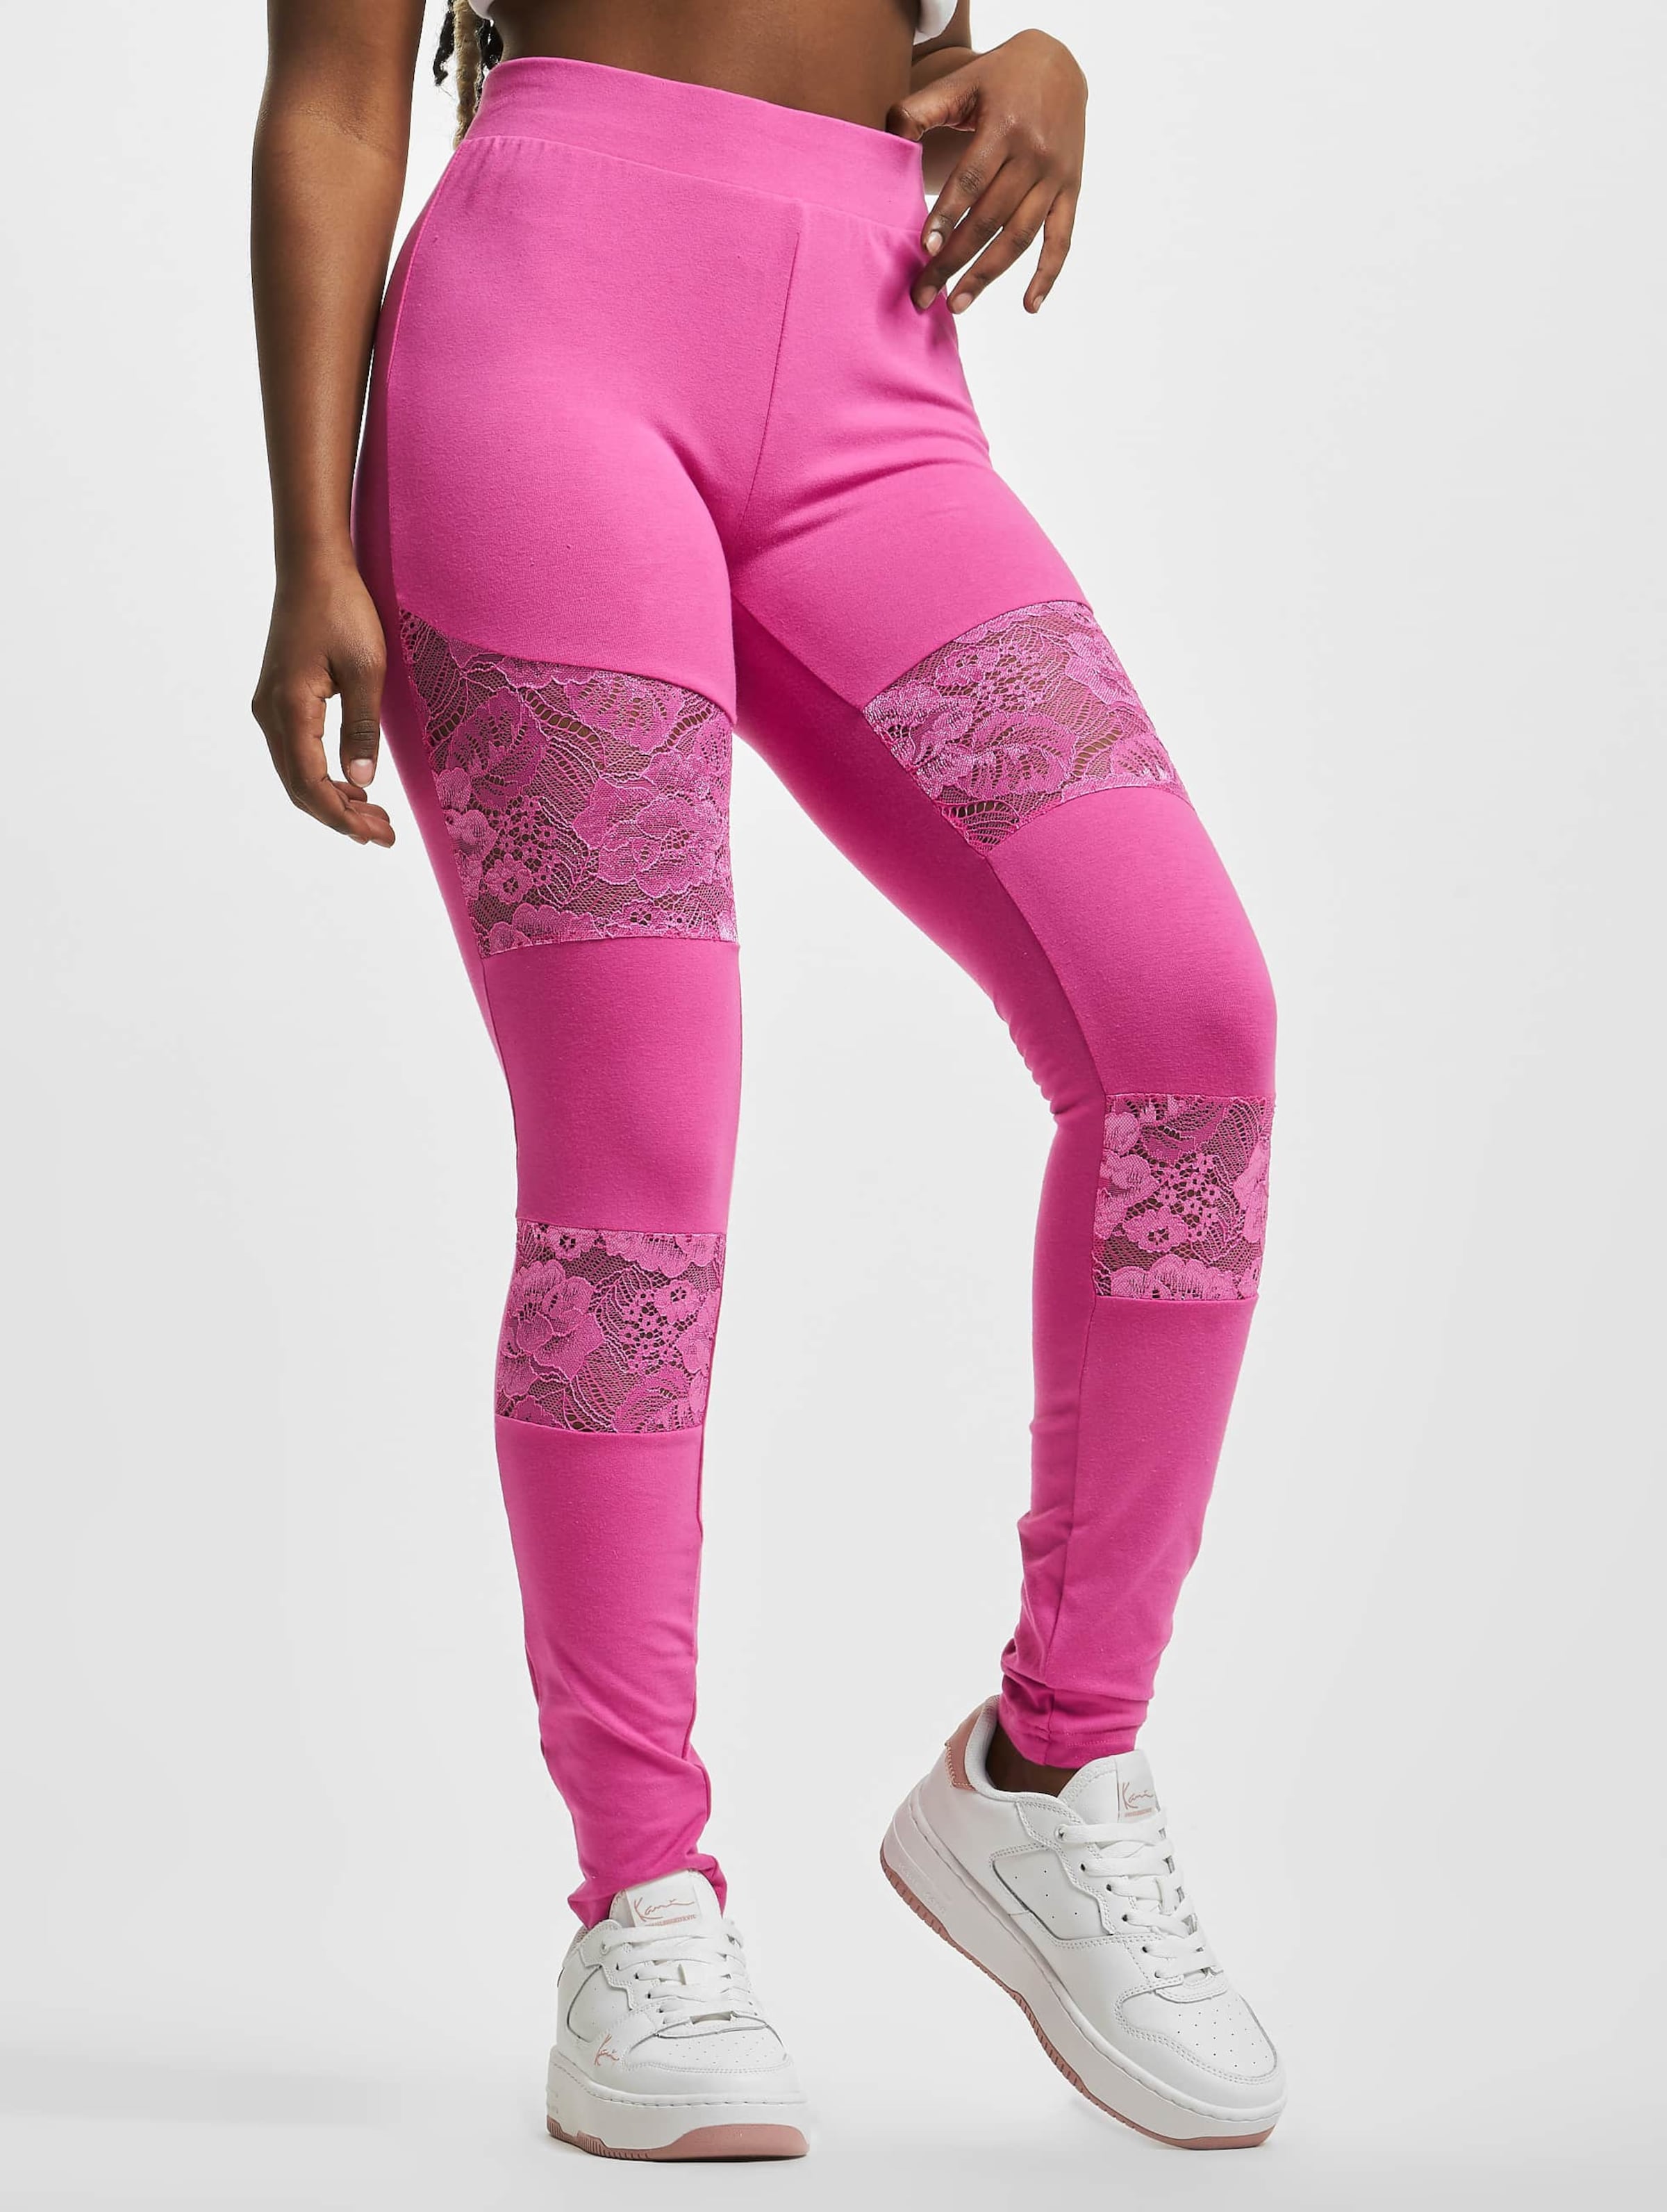 Womens Workout Yoga Ombre Black to Pink Leggings | Gearbunch.com